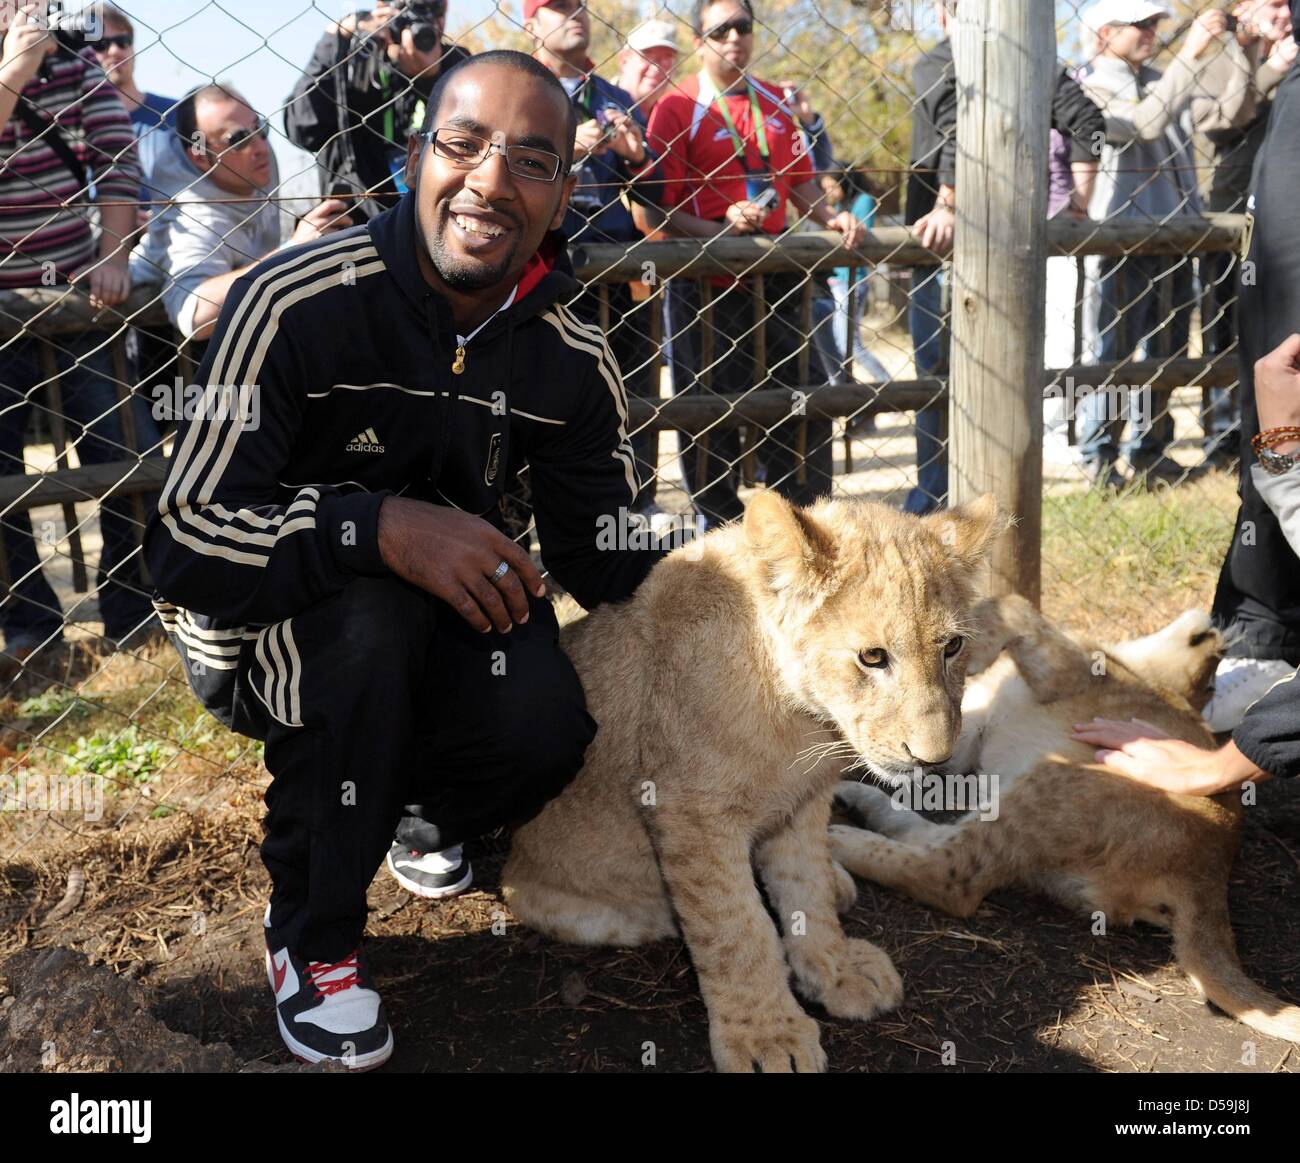 German player Cacau strokes a young lion as the team visits the Lion ...